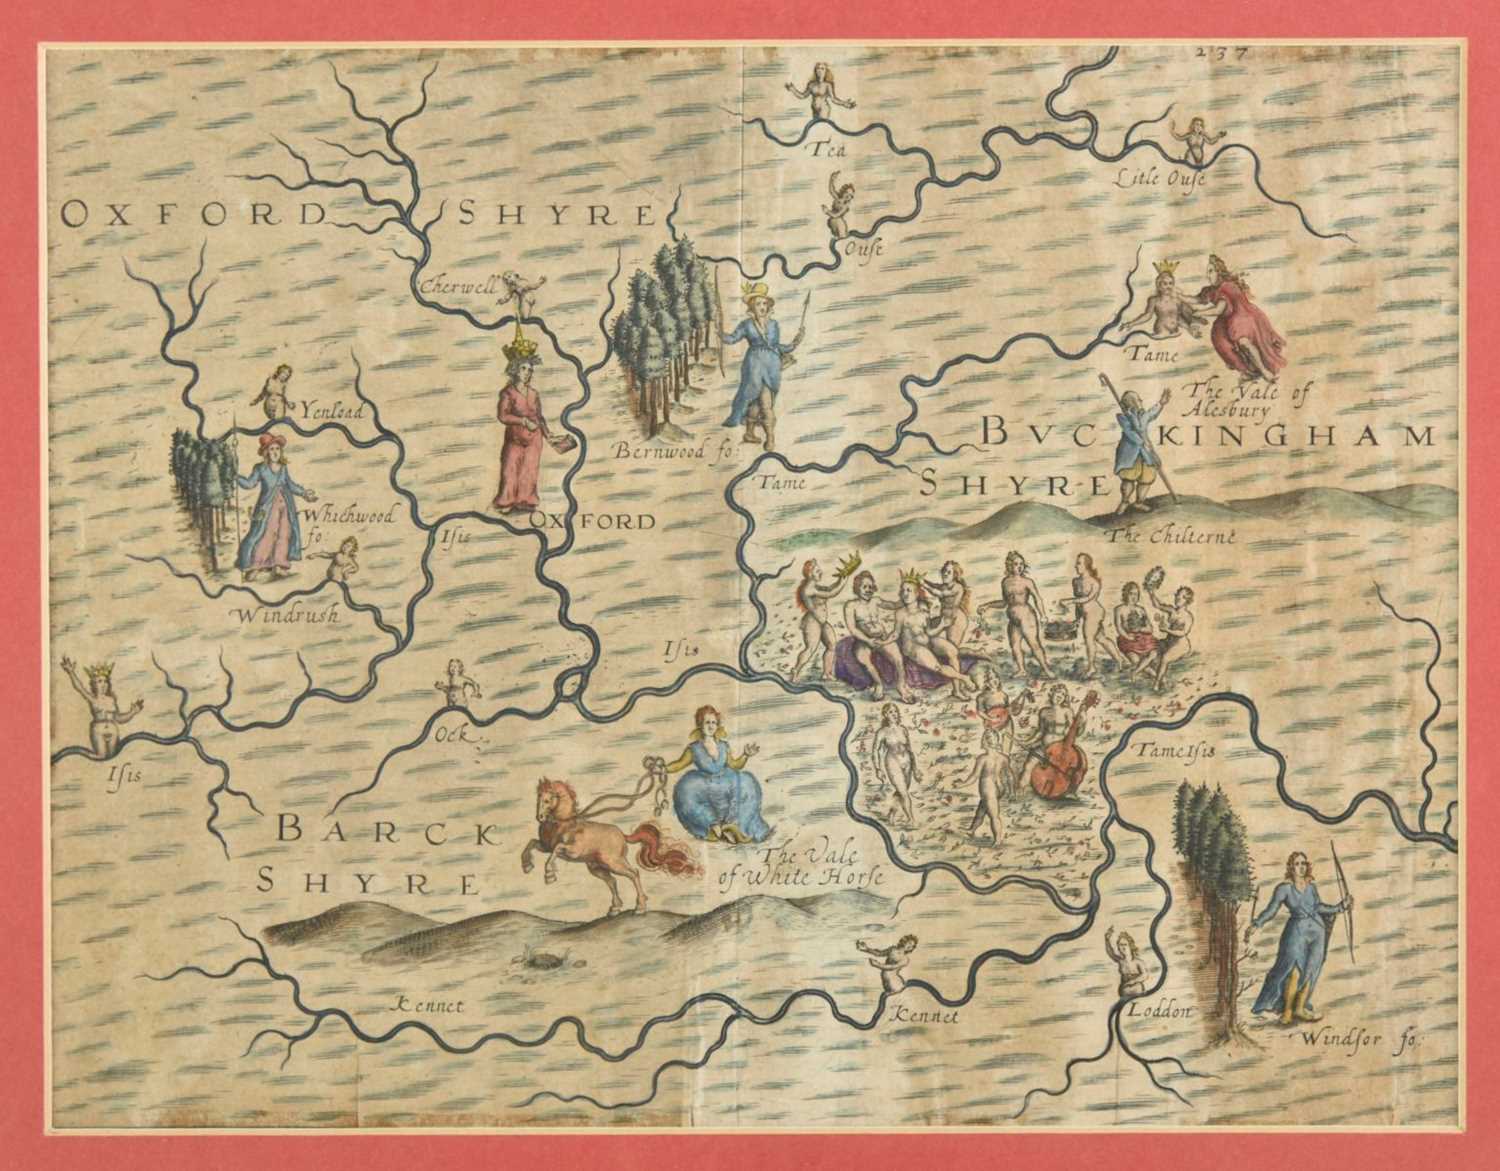 Lot 29 - Drayton (Michael). Two allegorical maps, 1612 or later